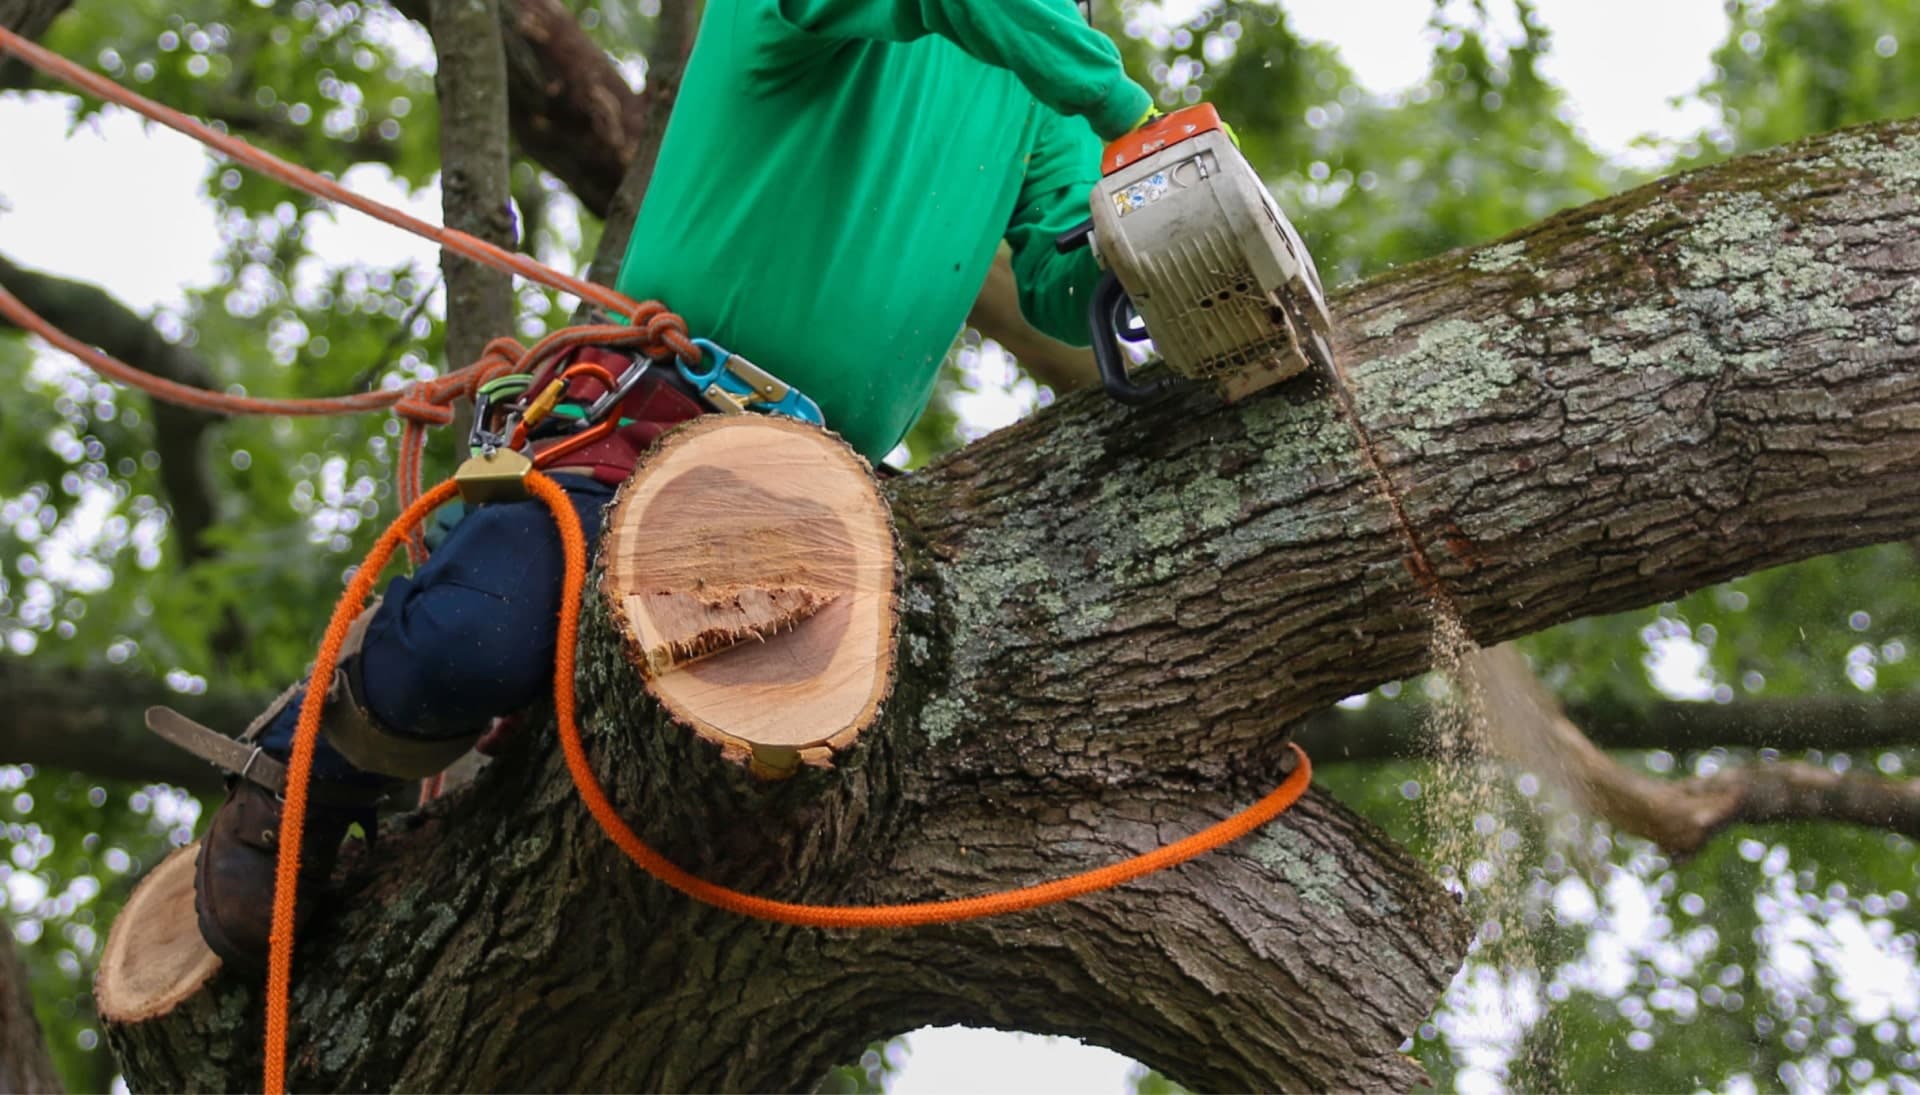 Shed your worries away with best tree removal in Gilbert